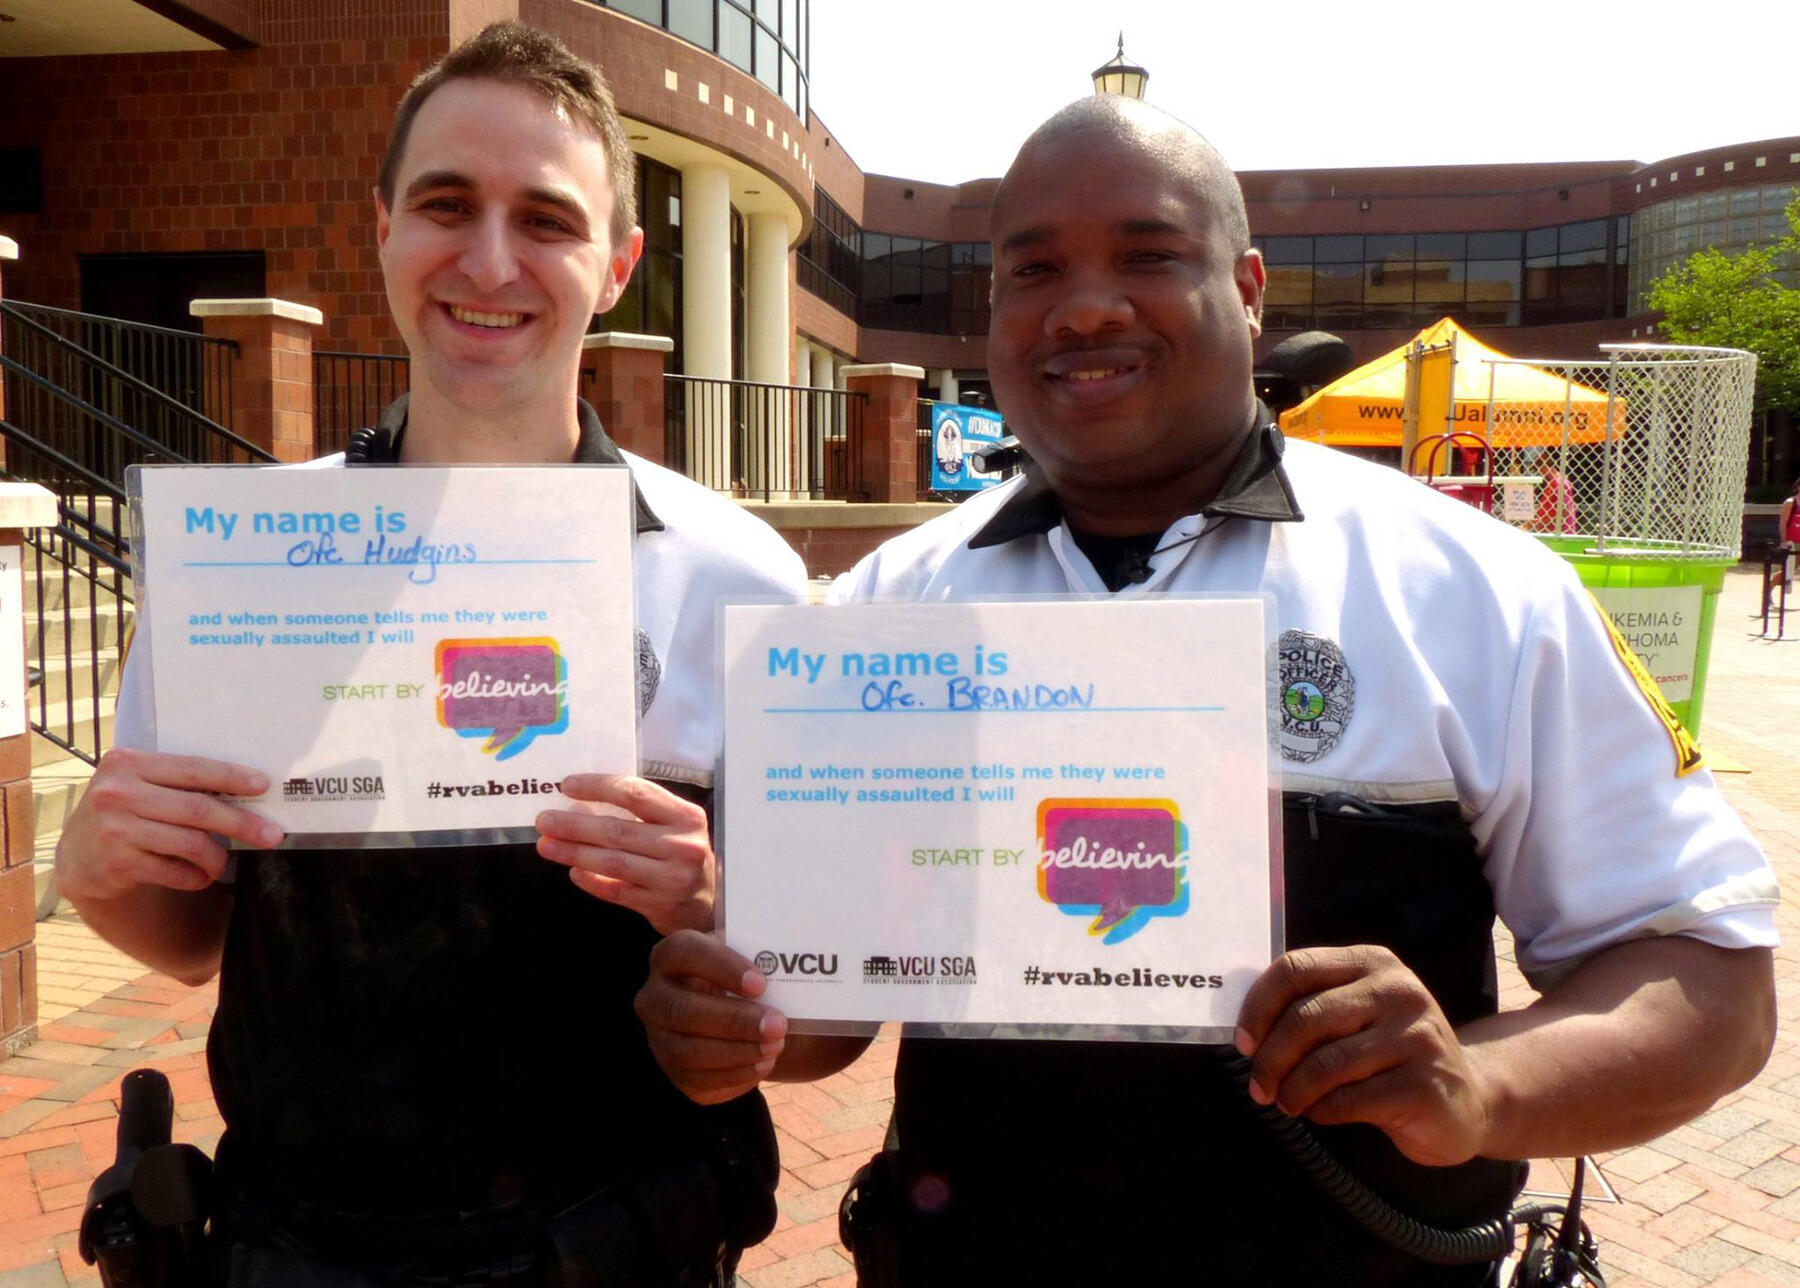 VCU Police Officers Andrew Hudgins and Michael Brandon sign Start By Believing pledges in April 2014. VCU Police joined the national Start by Believing awareness campaign to encourage friends and family members of sexual assault victims to believe them, and be supportive of them, when they disclose an assault.